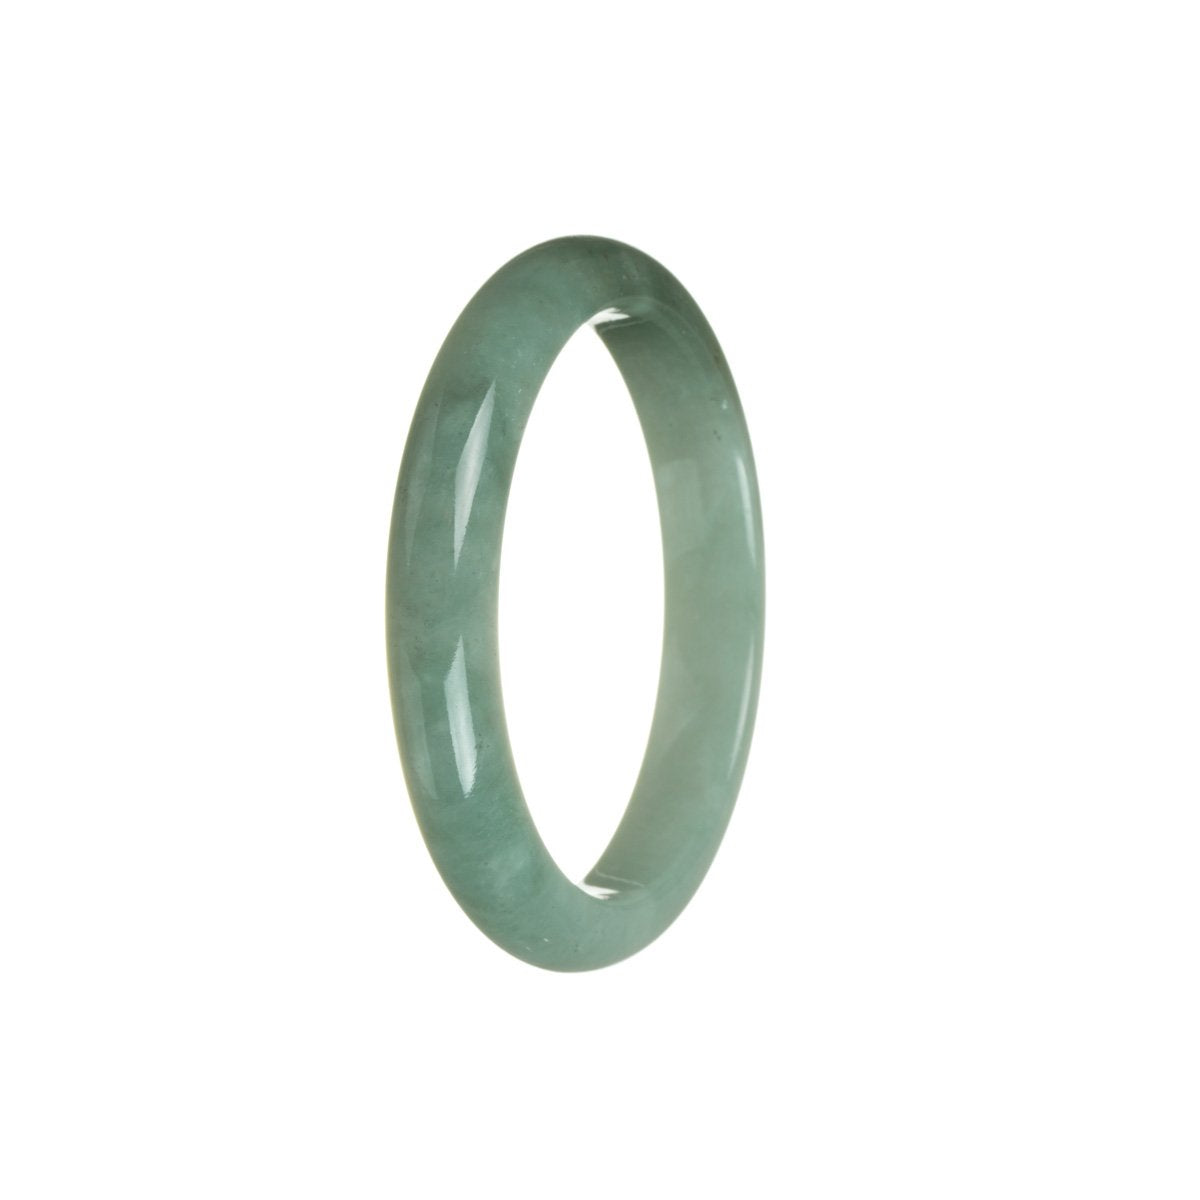 A close-up image of a half moon shaped green jade bangle bracelet. The bracelet is made of certified Type A green jade and has a diameter of 55mm. The brand name "MAYS" is engraved on the inner side of the bracelet.